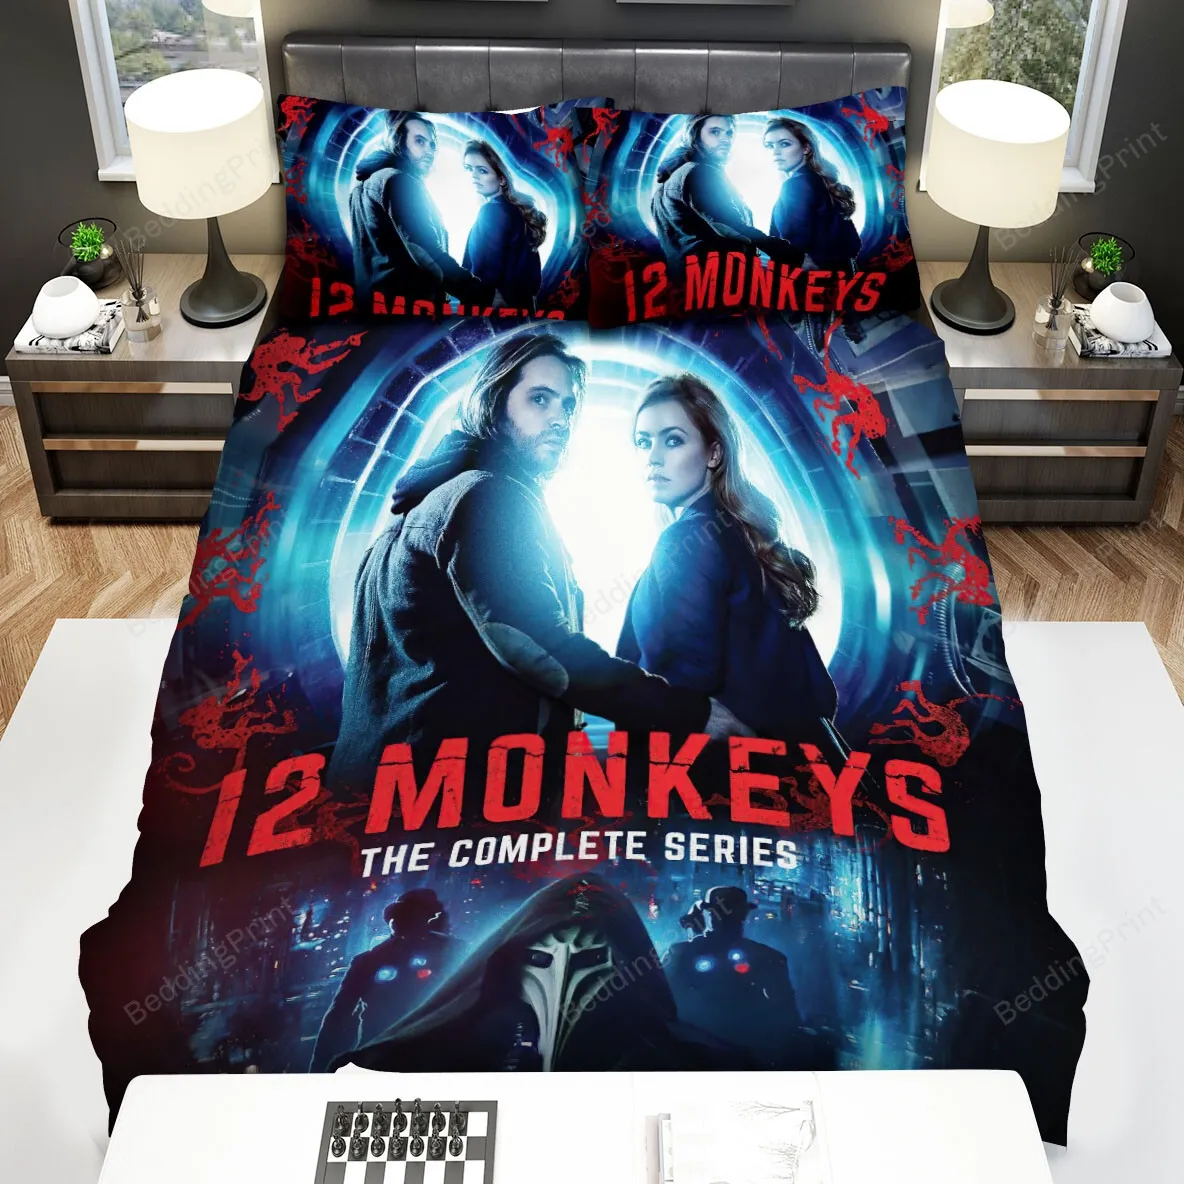 12 Monkeys (20152018) The Complete Series Movie Poster Bed Sheets Spread Comforter Duvet Cover Bedding Sets